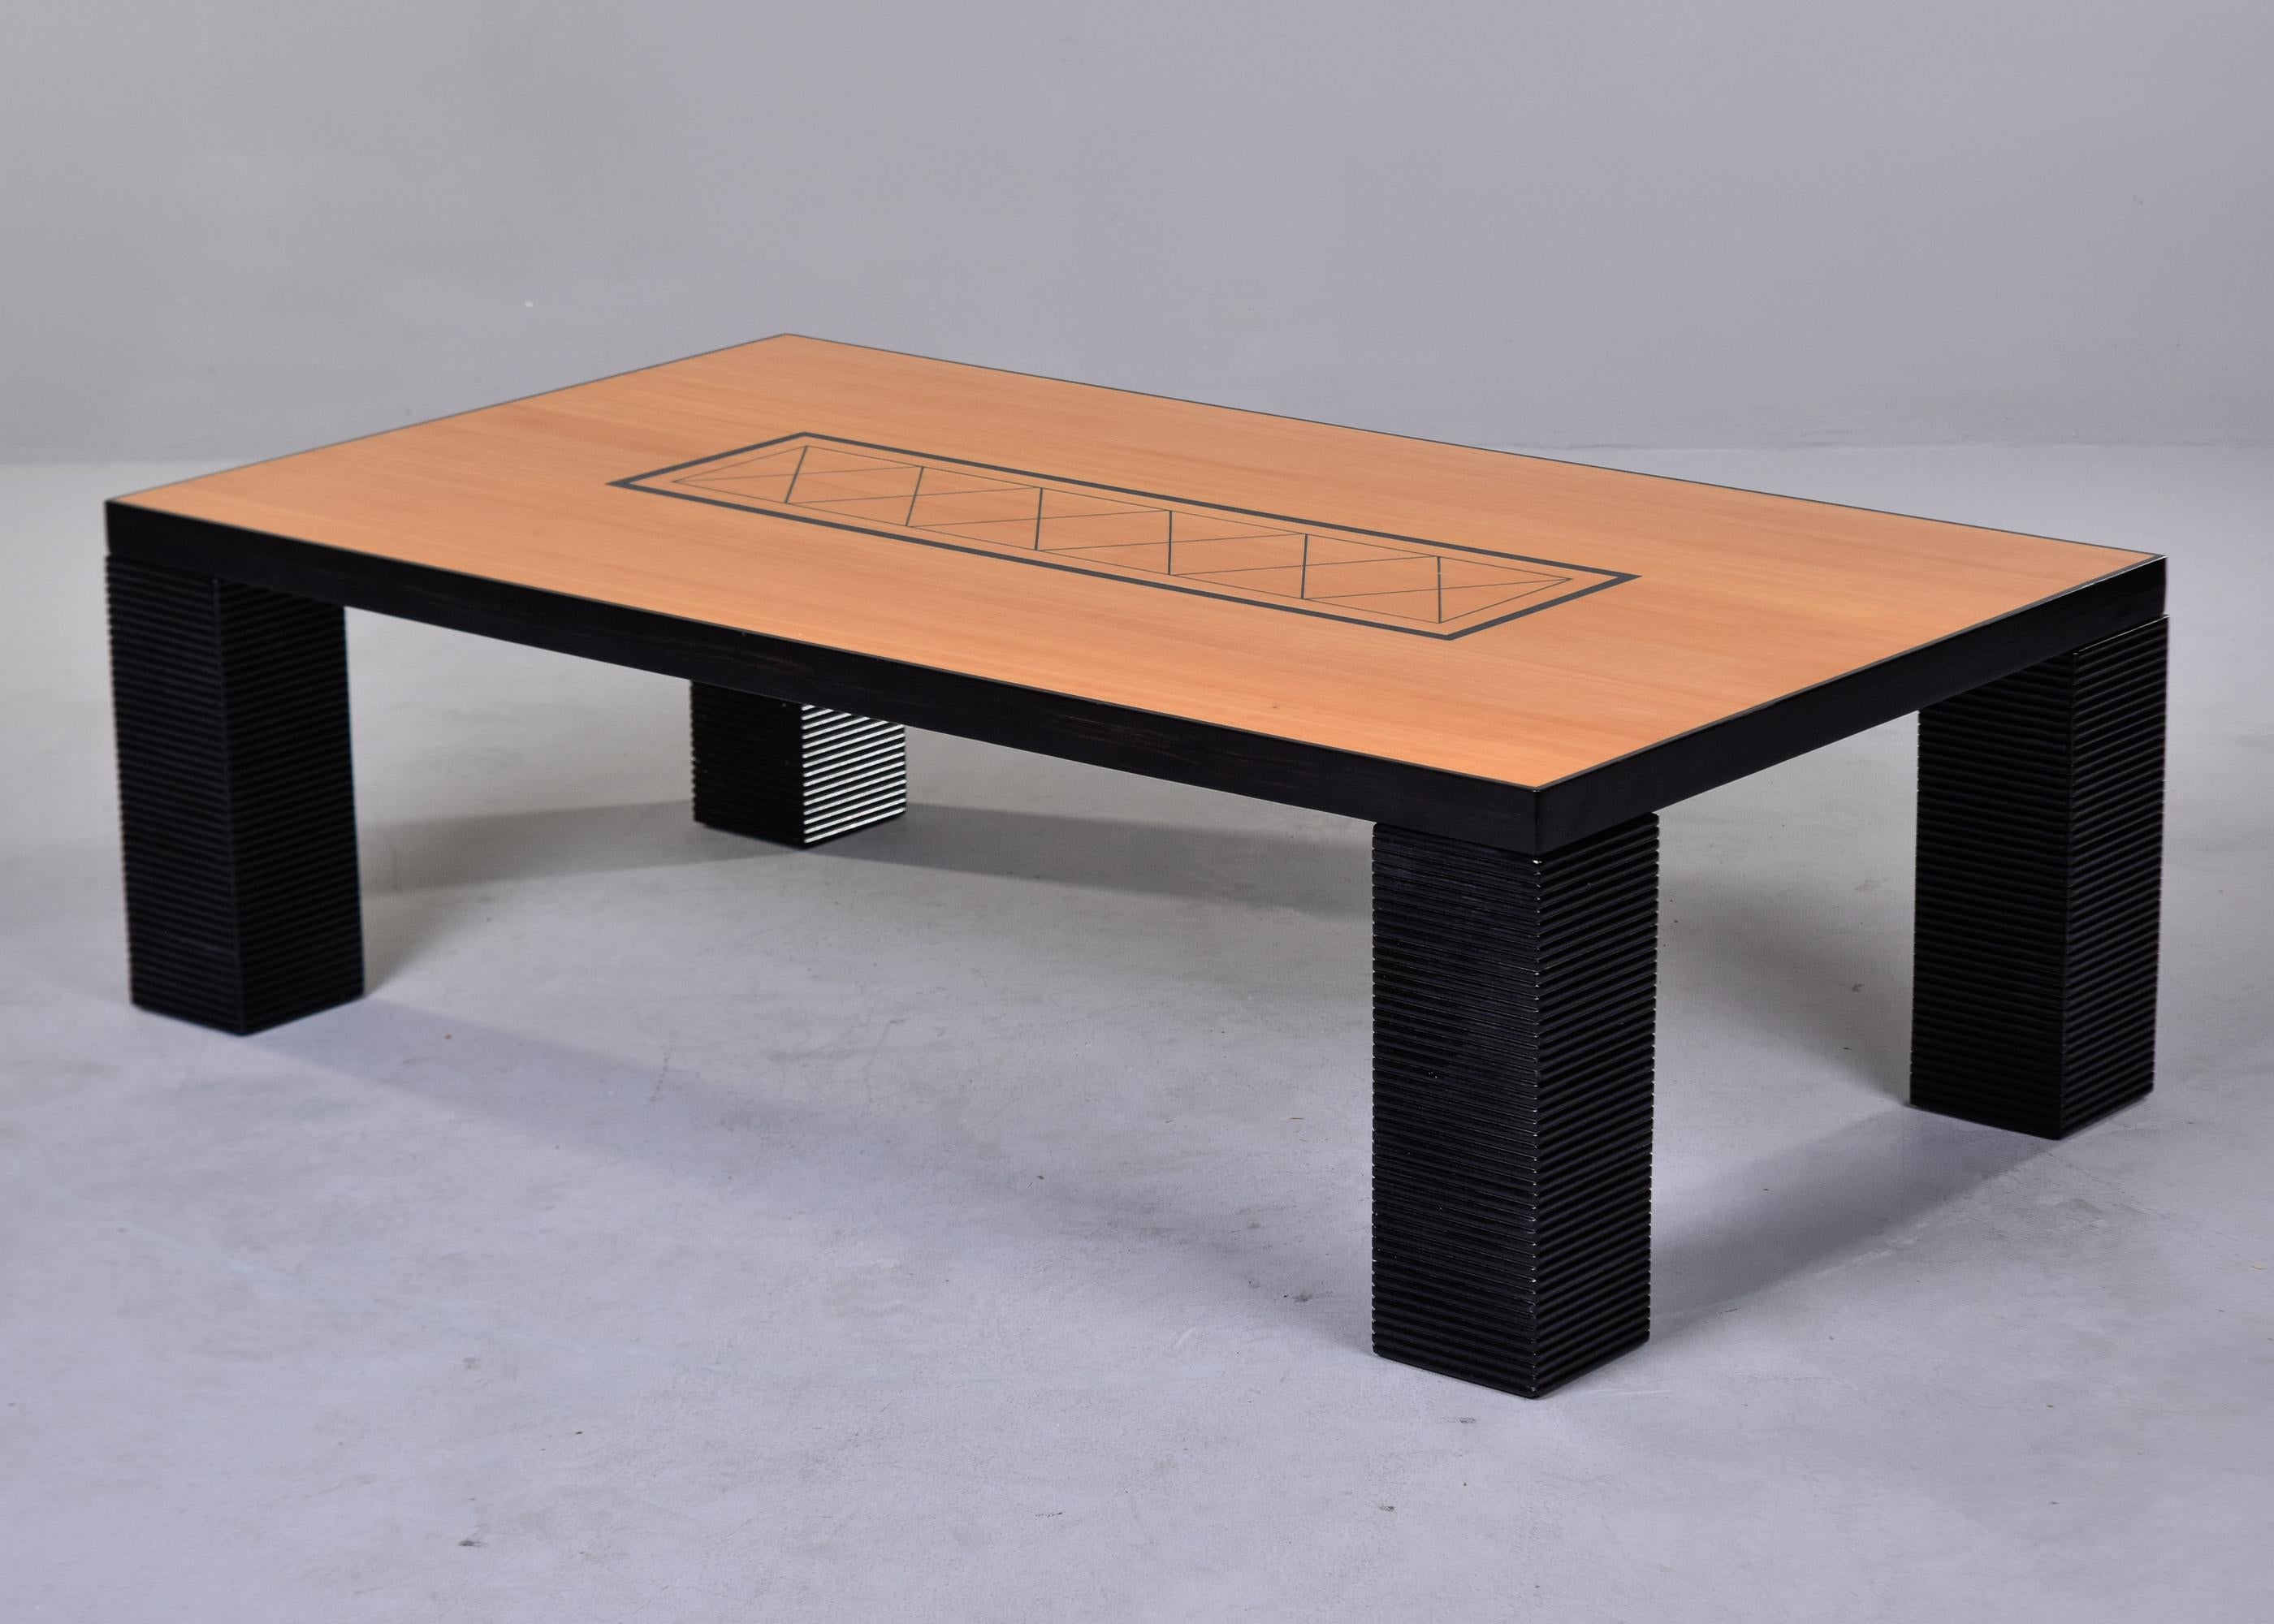 Oversized Italian Art Deco Birch and Black Coffee Table For Sale 4